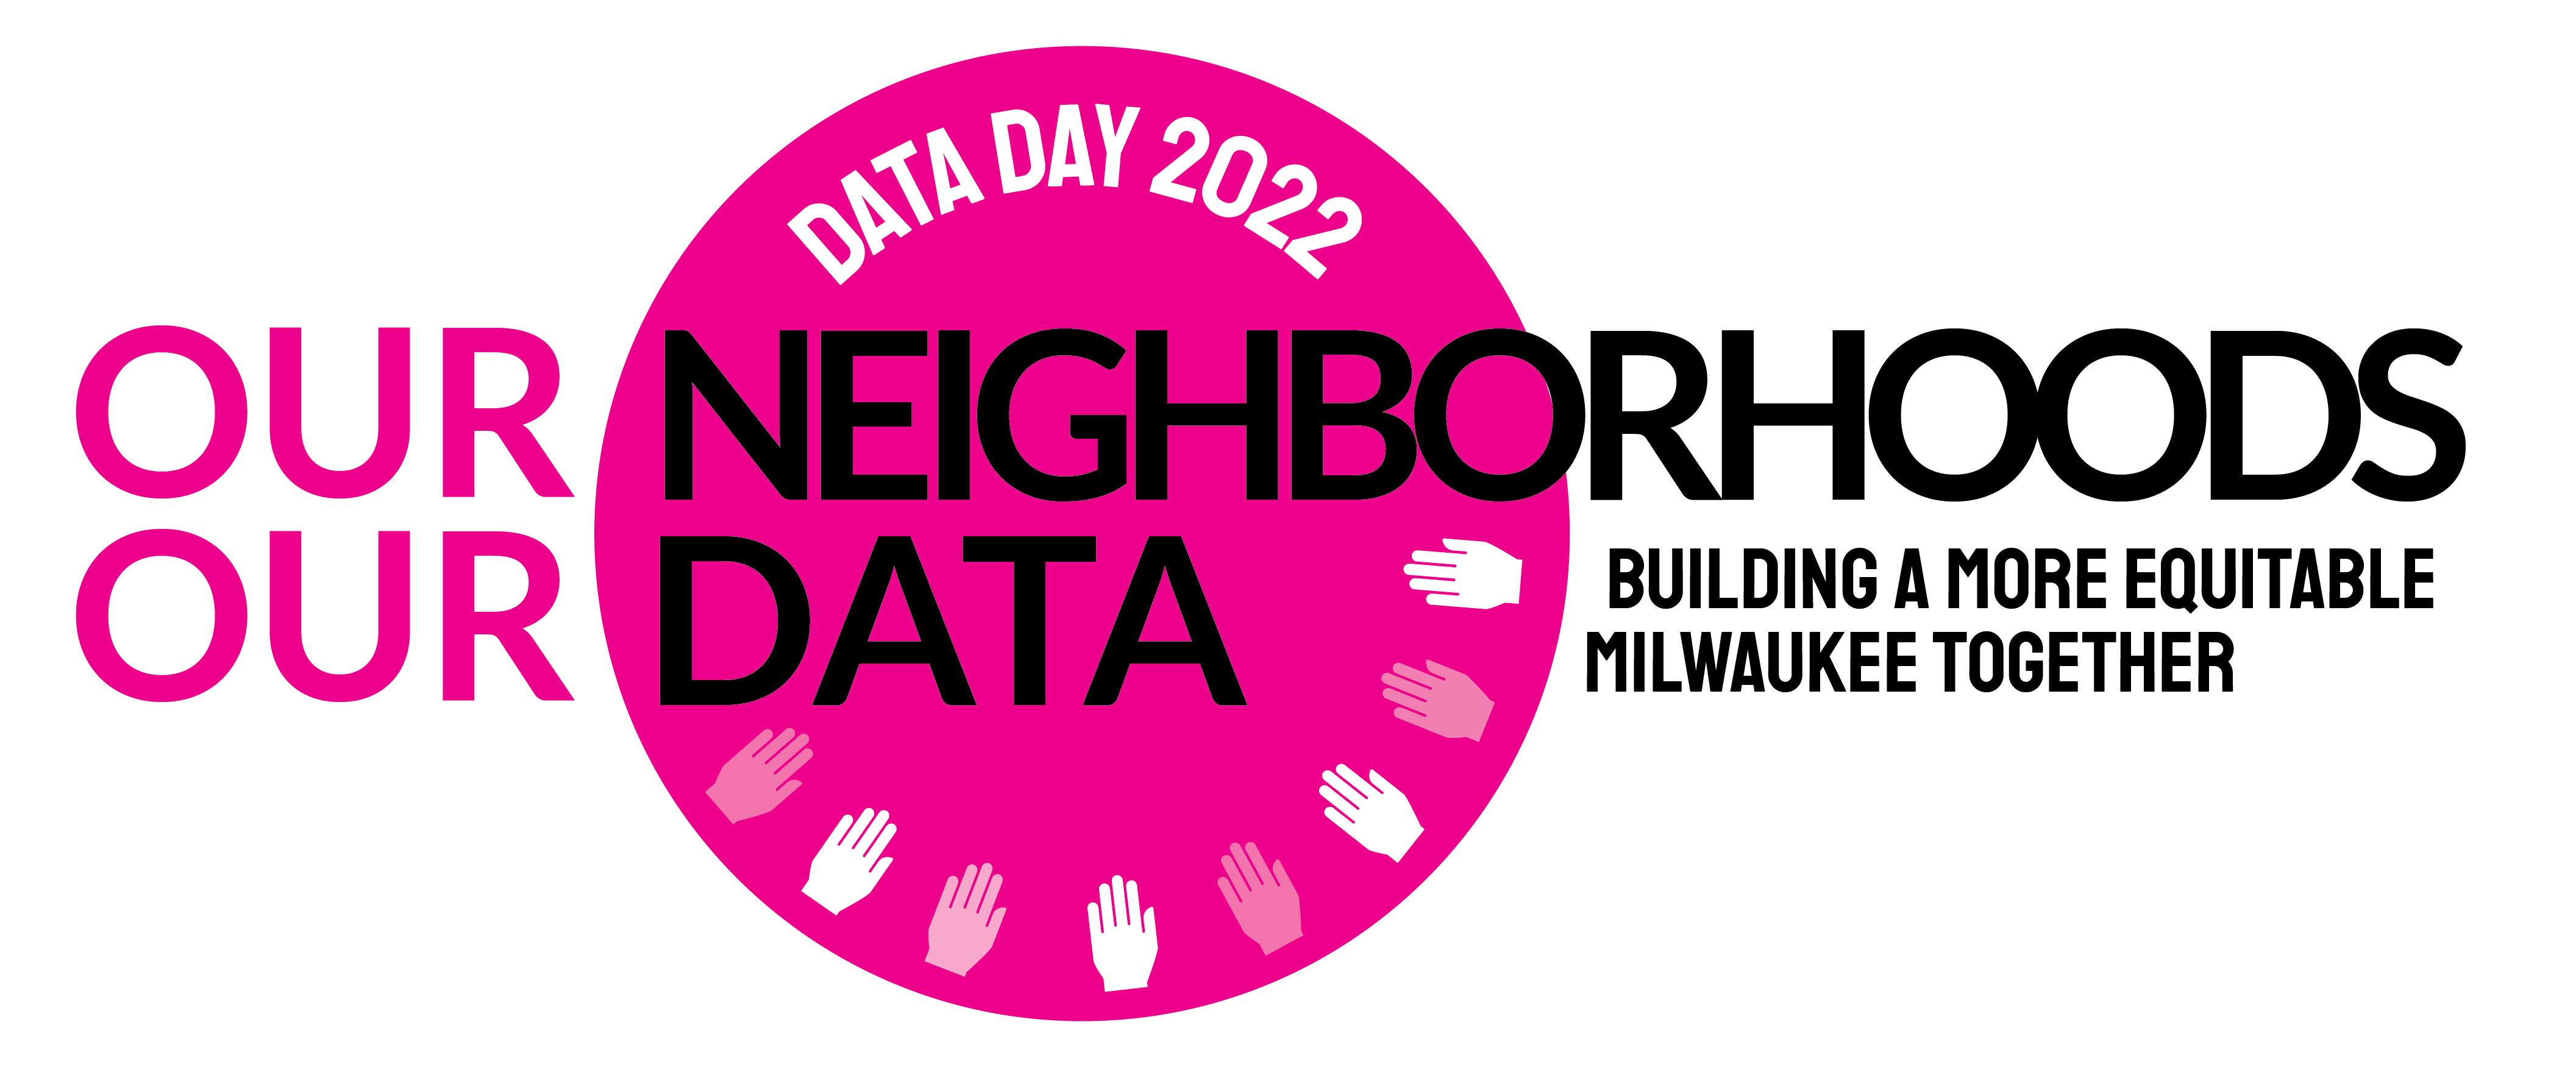 Save the Date: Data Day 2022 will be on October 19th